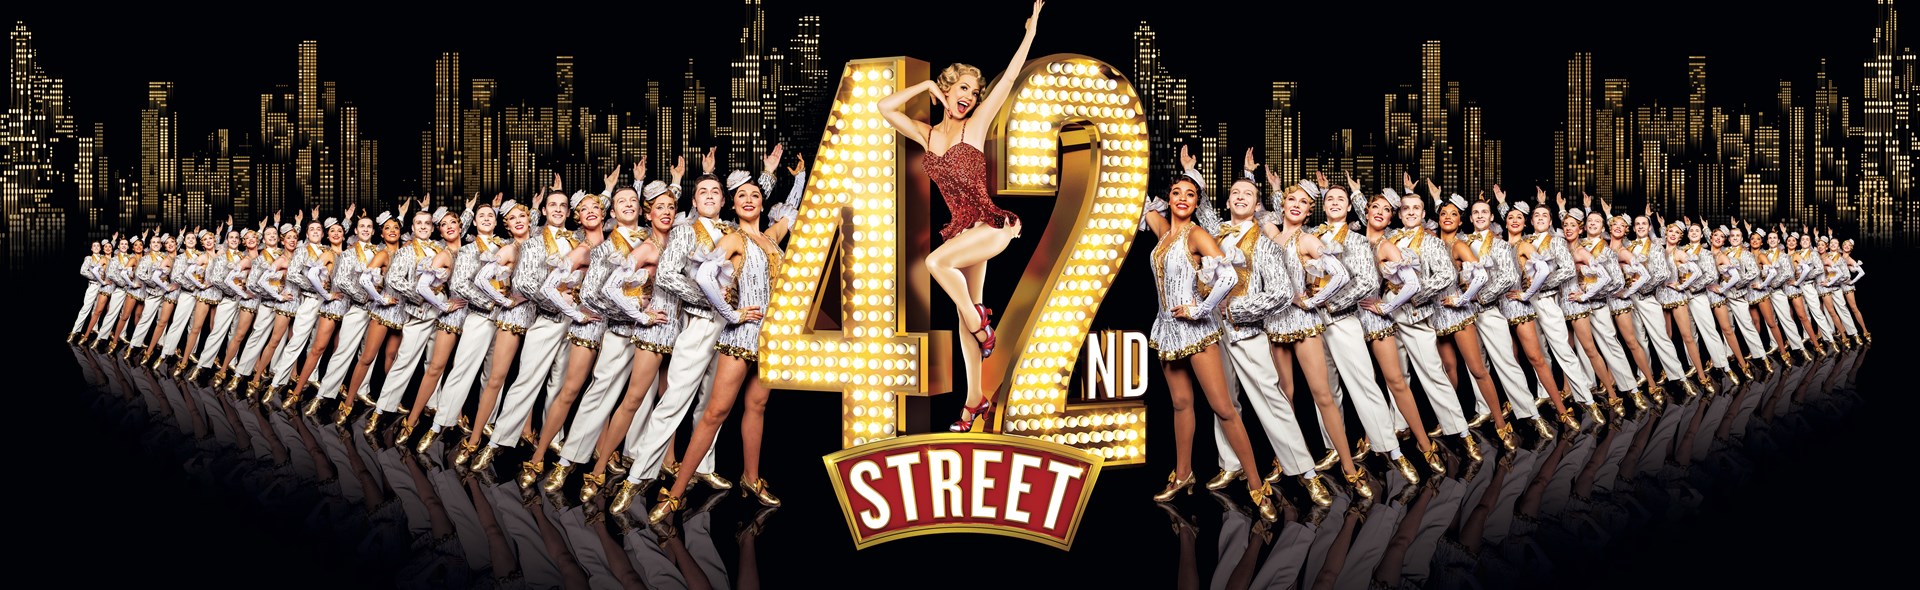 42nd Street - The Musical (PG)